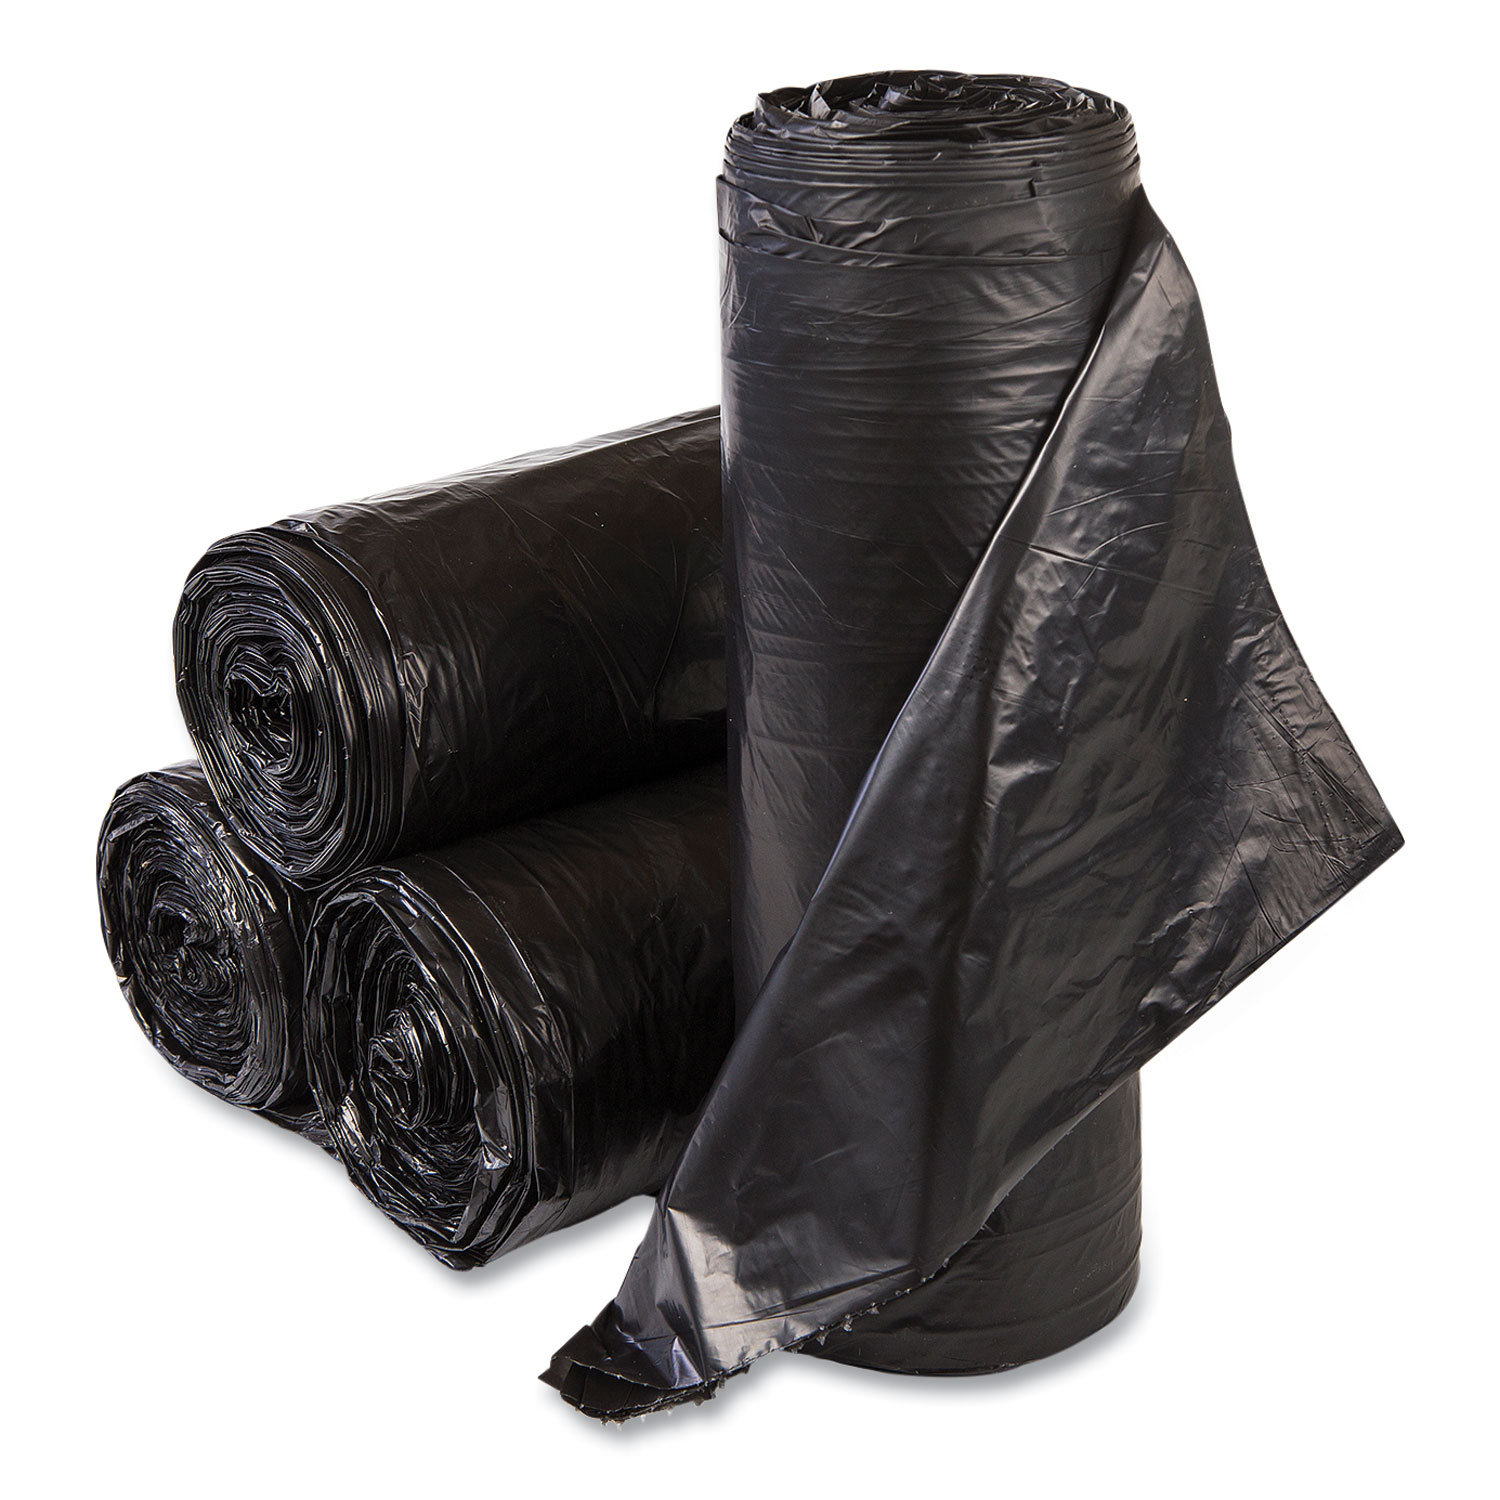 Commercial trash bags 33 gallon 33x40 11 mic case of 500